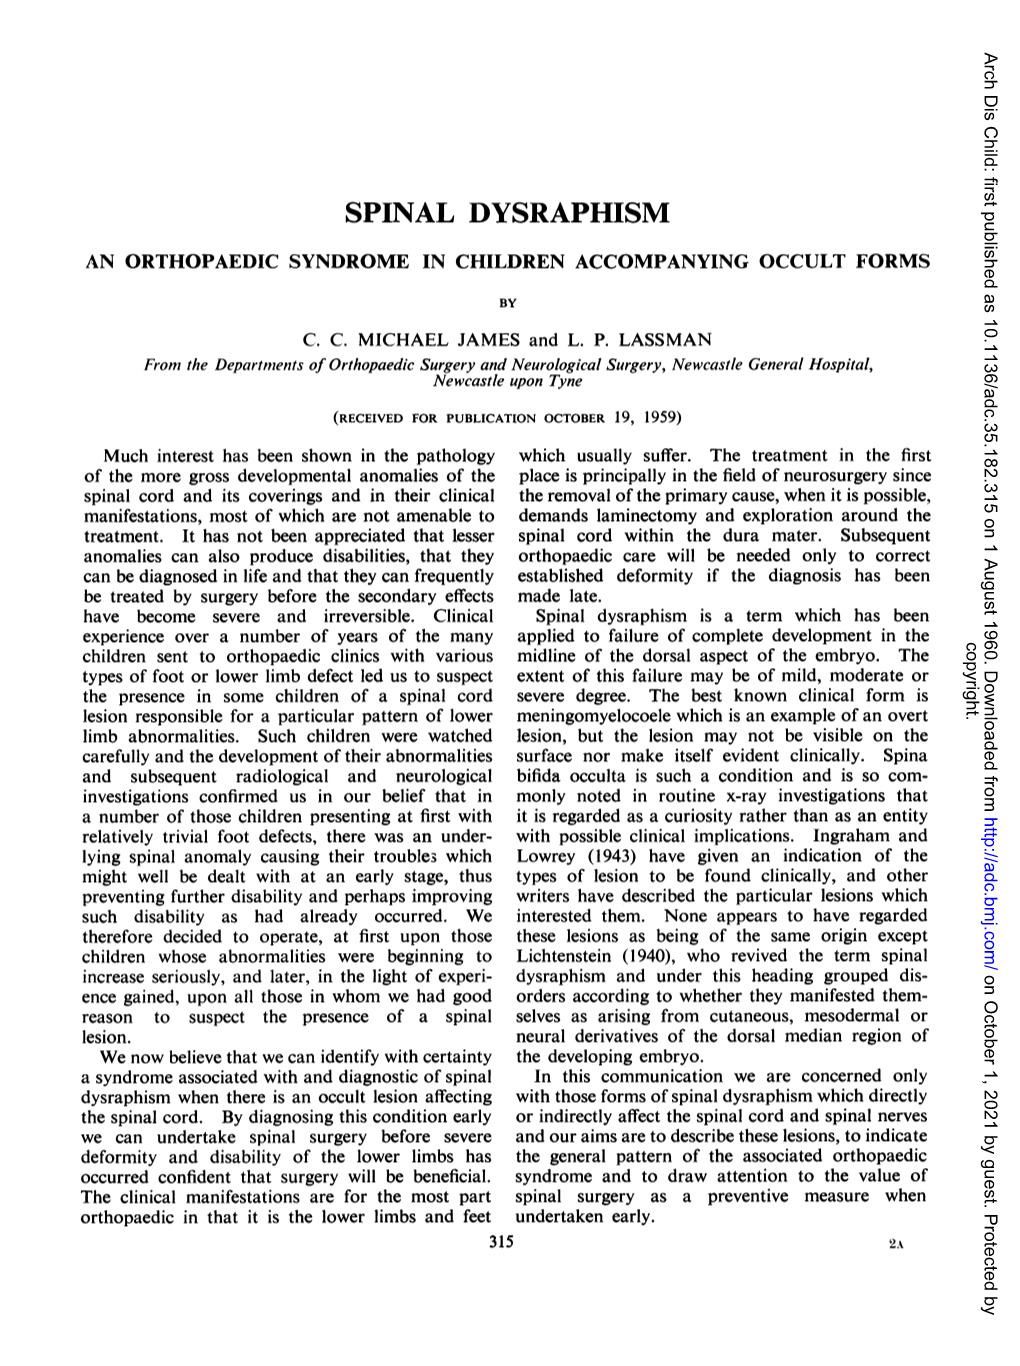 Spinal Dysraphism an Orthopaedic Syndrome in Children Accompanying Occult Forms